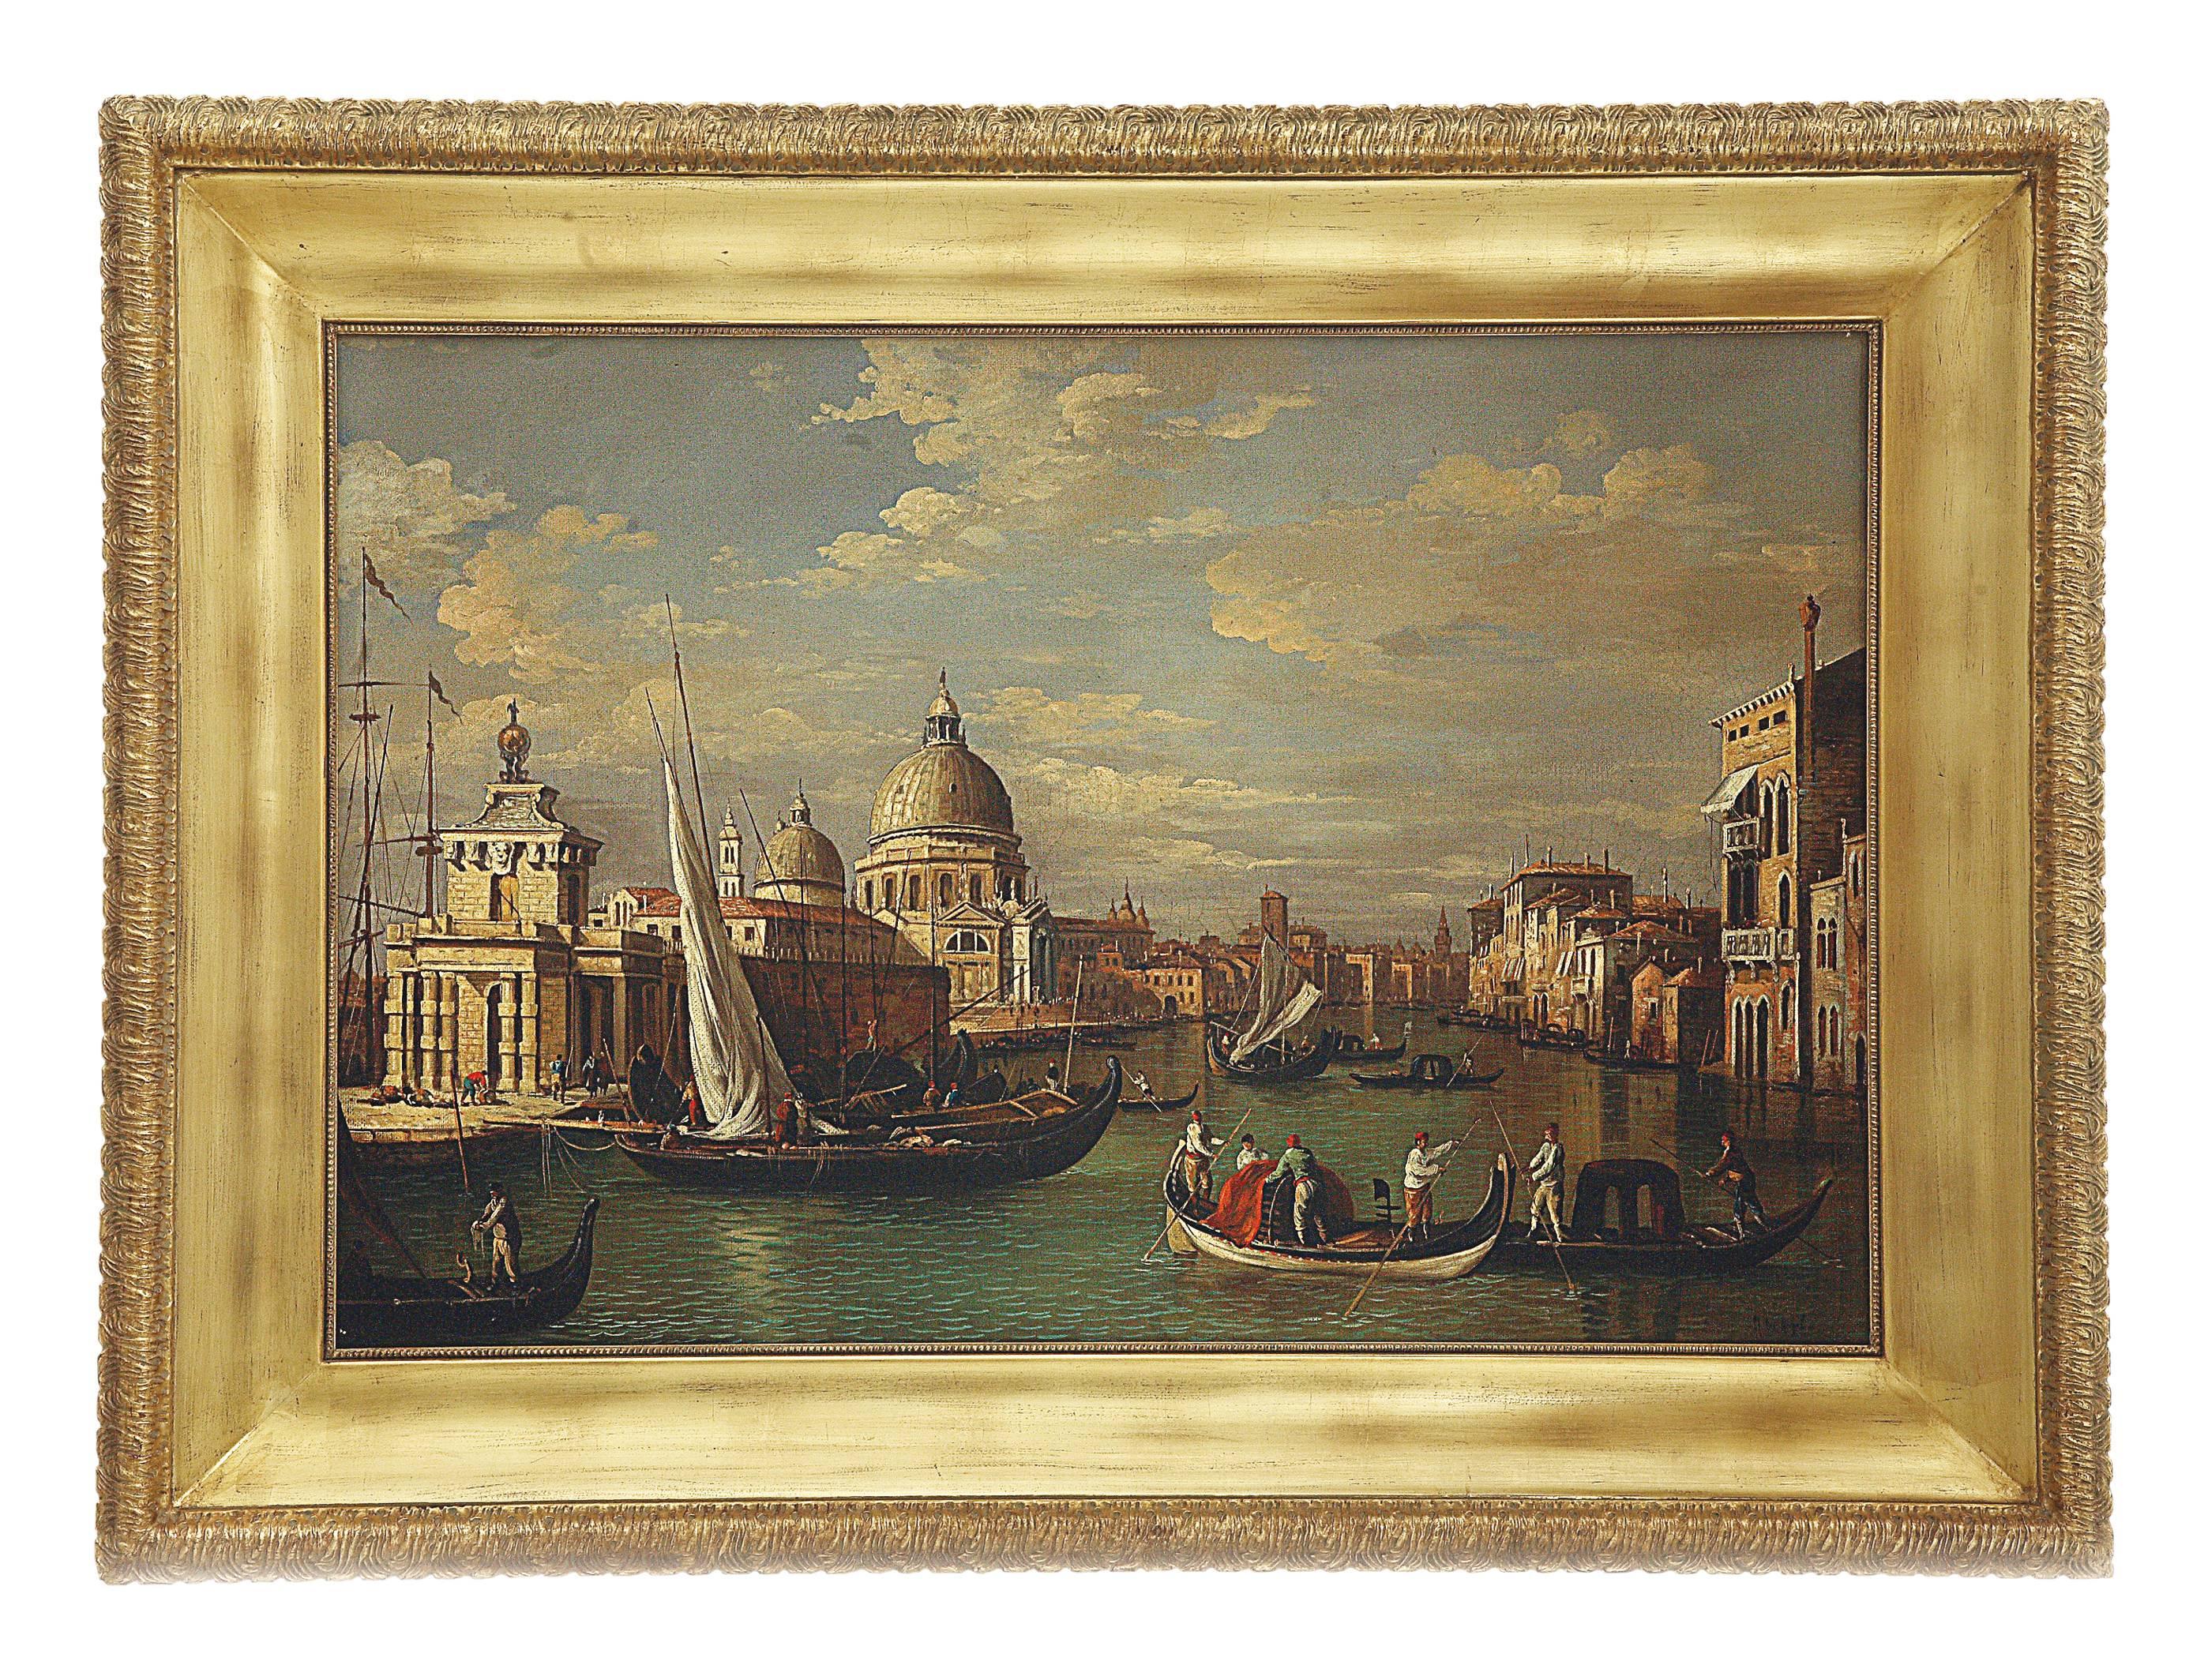 Mario De Angeli Landscape Painting - VENICE -In the Manner of Canaletto- Italian Landscape Oil on Canvas Painting 